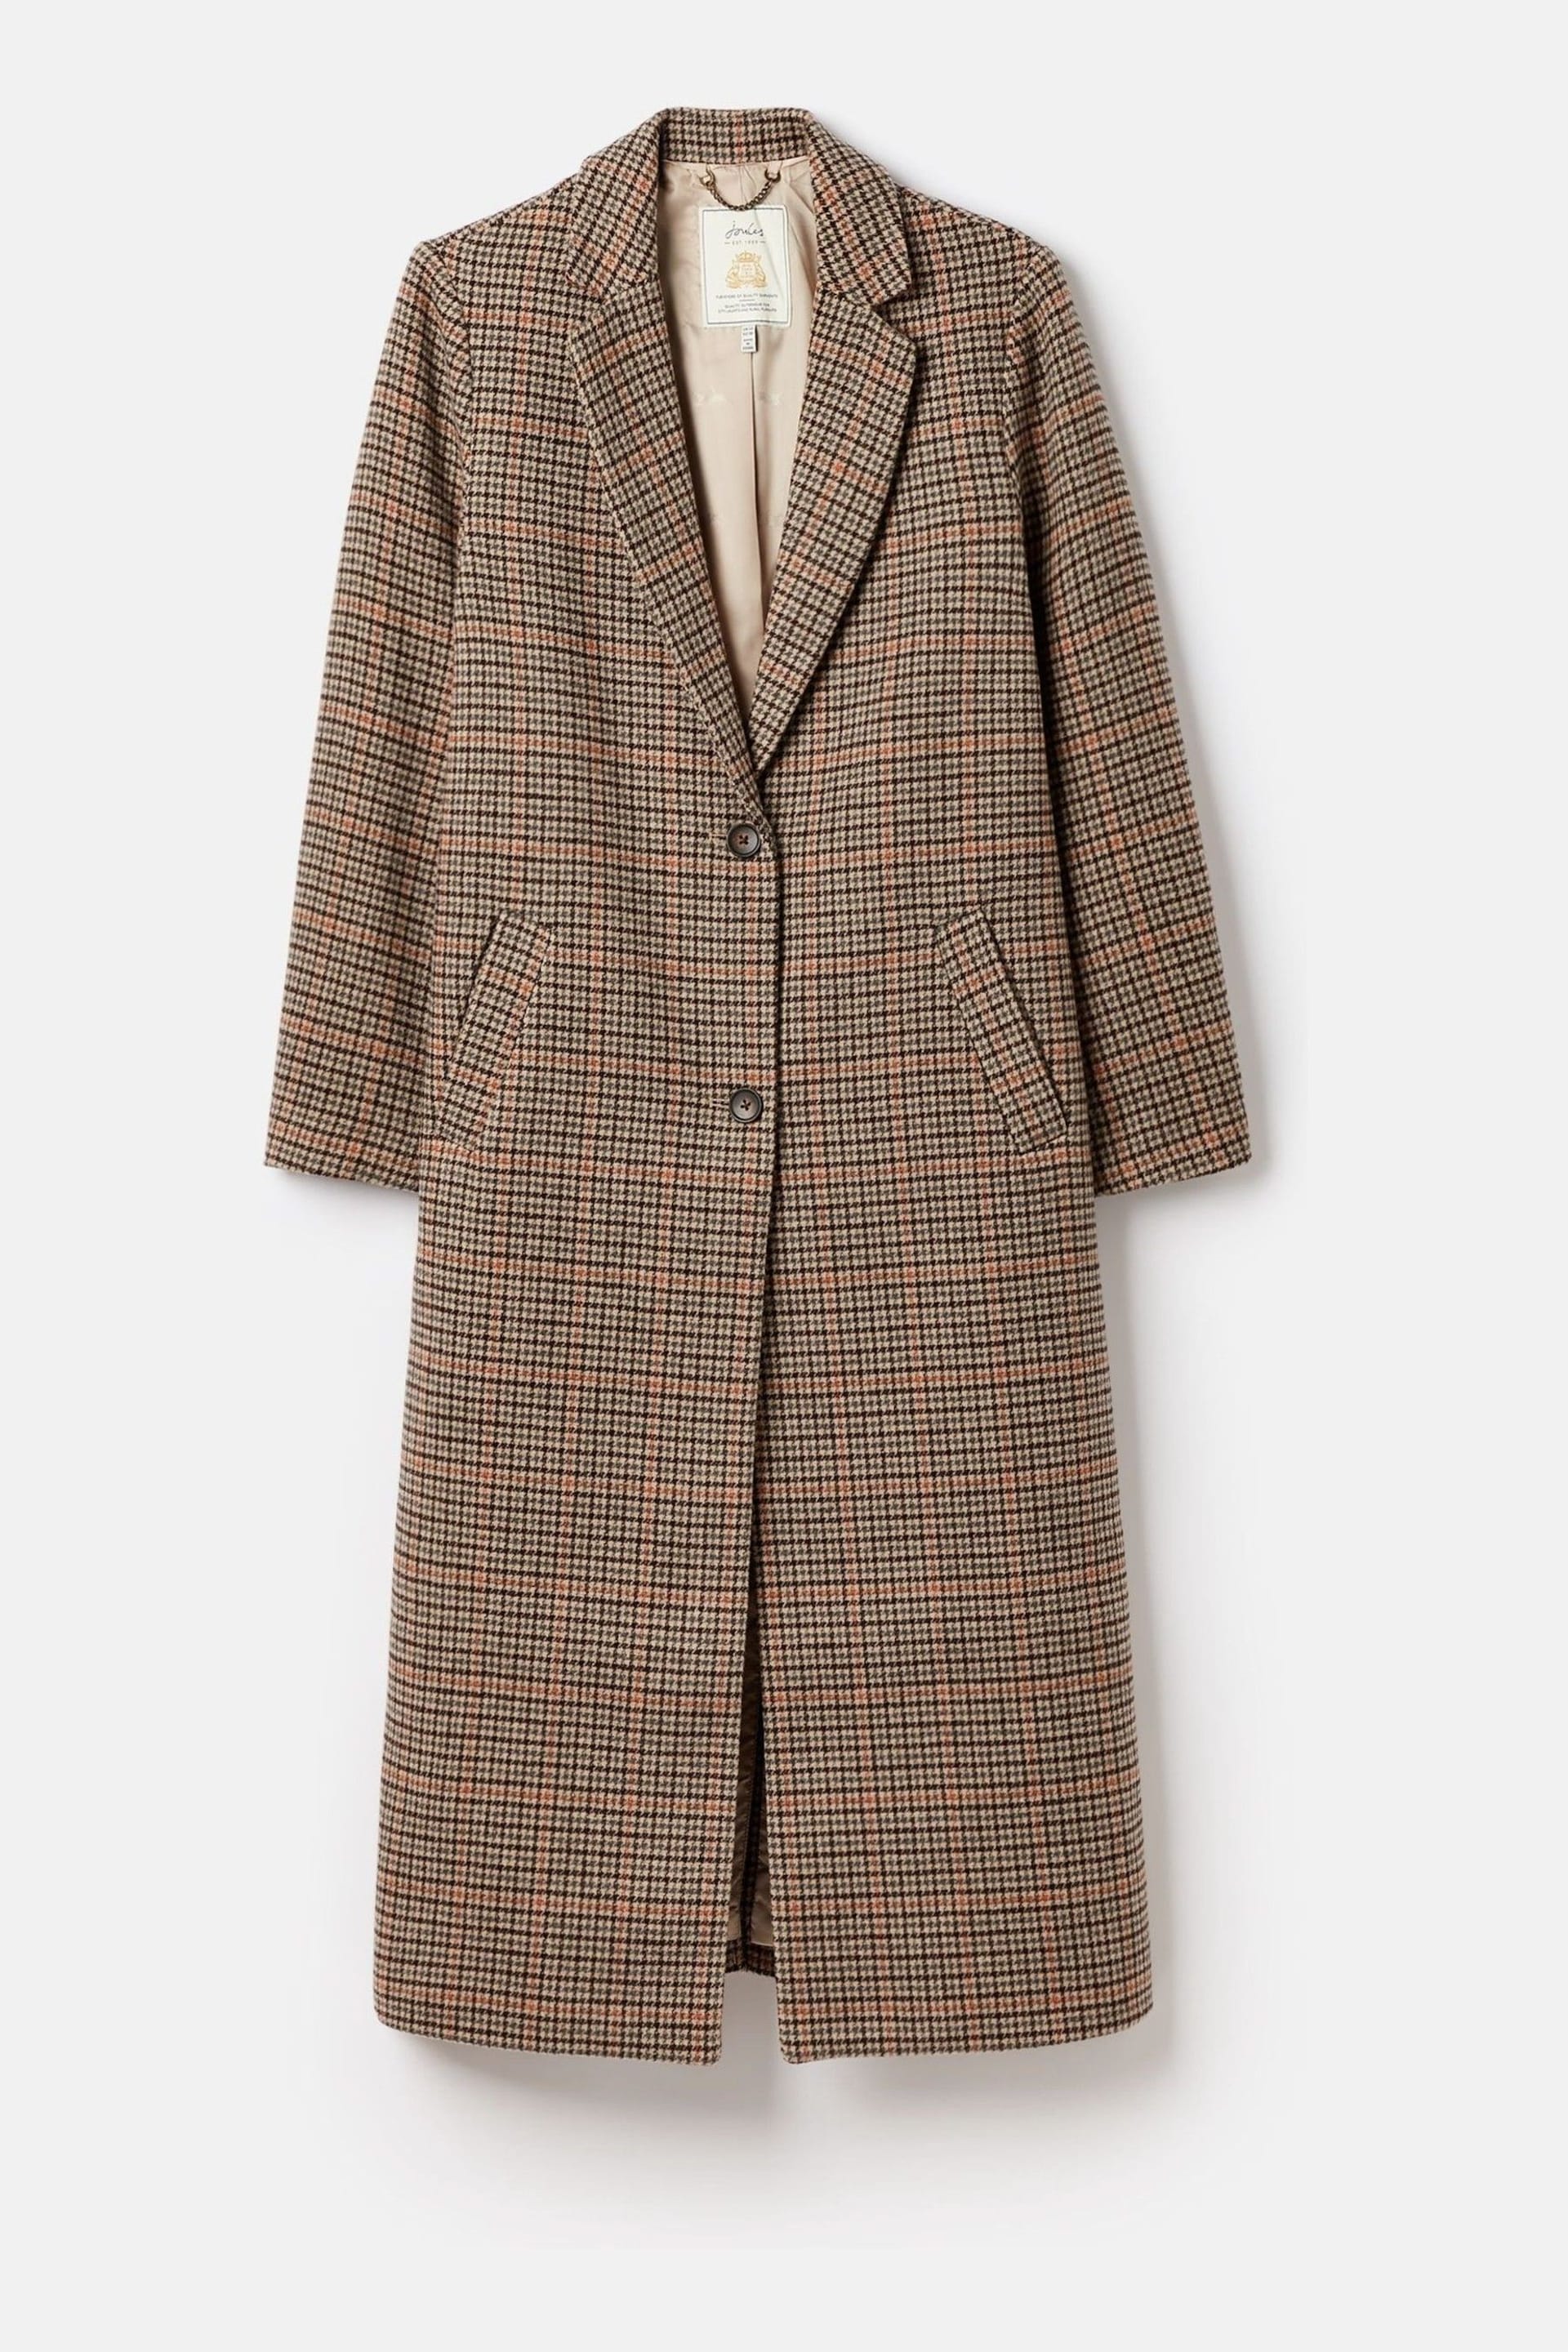 Joules Harrow Check Wool Blend Coat - Image 10 of 10